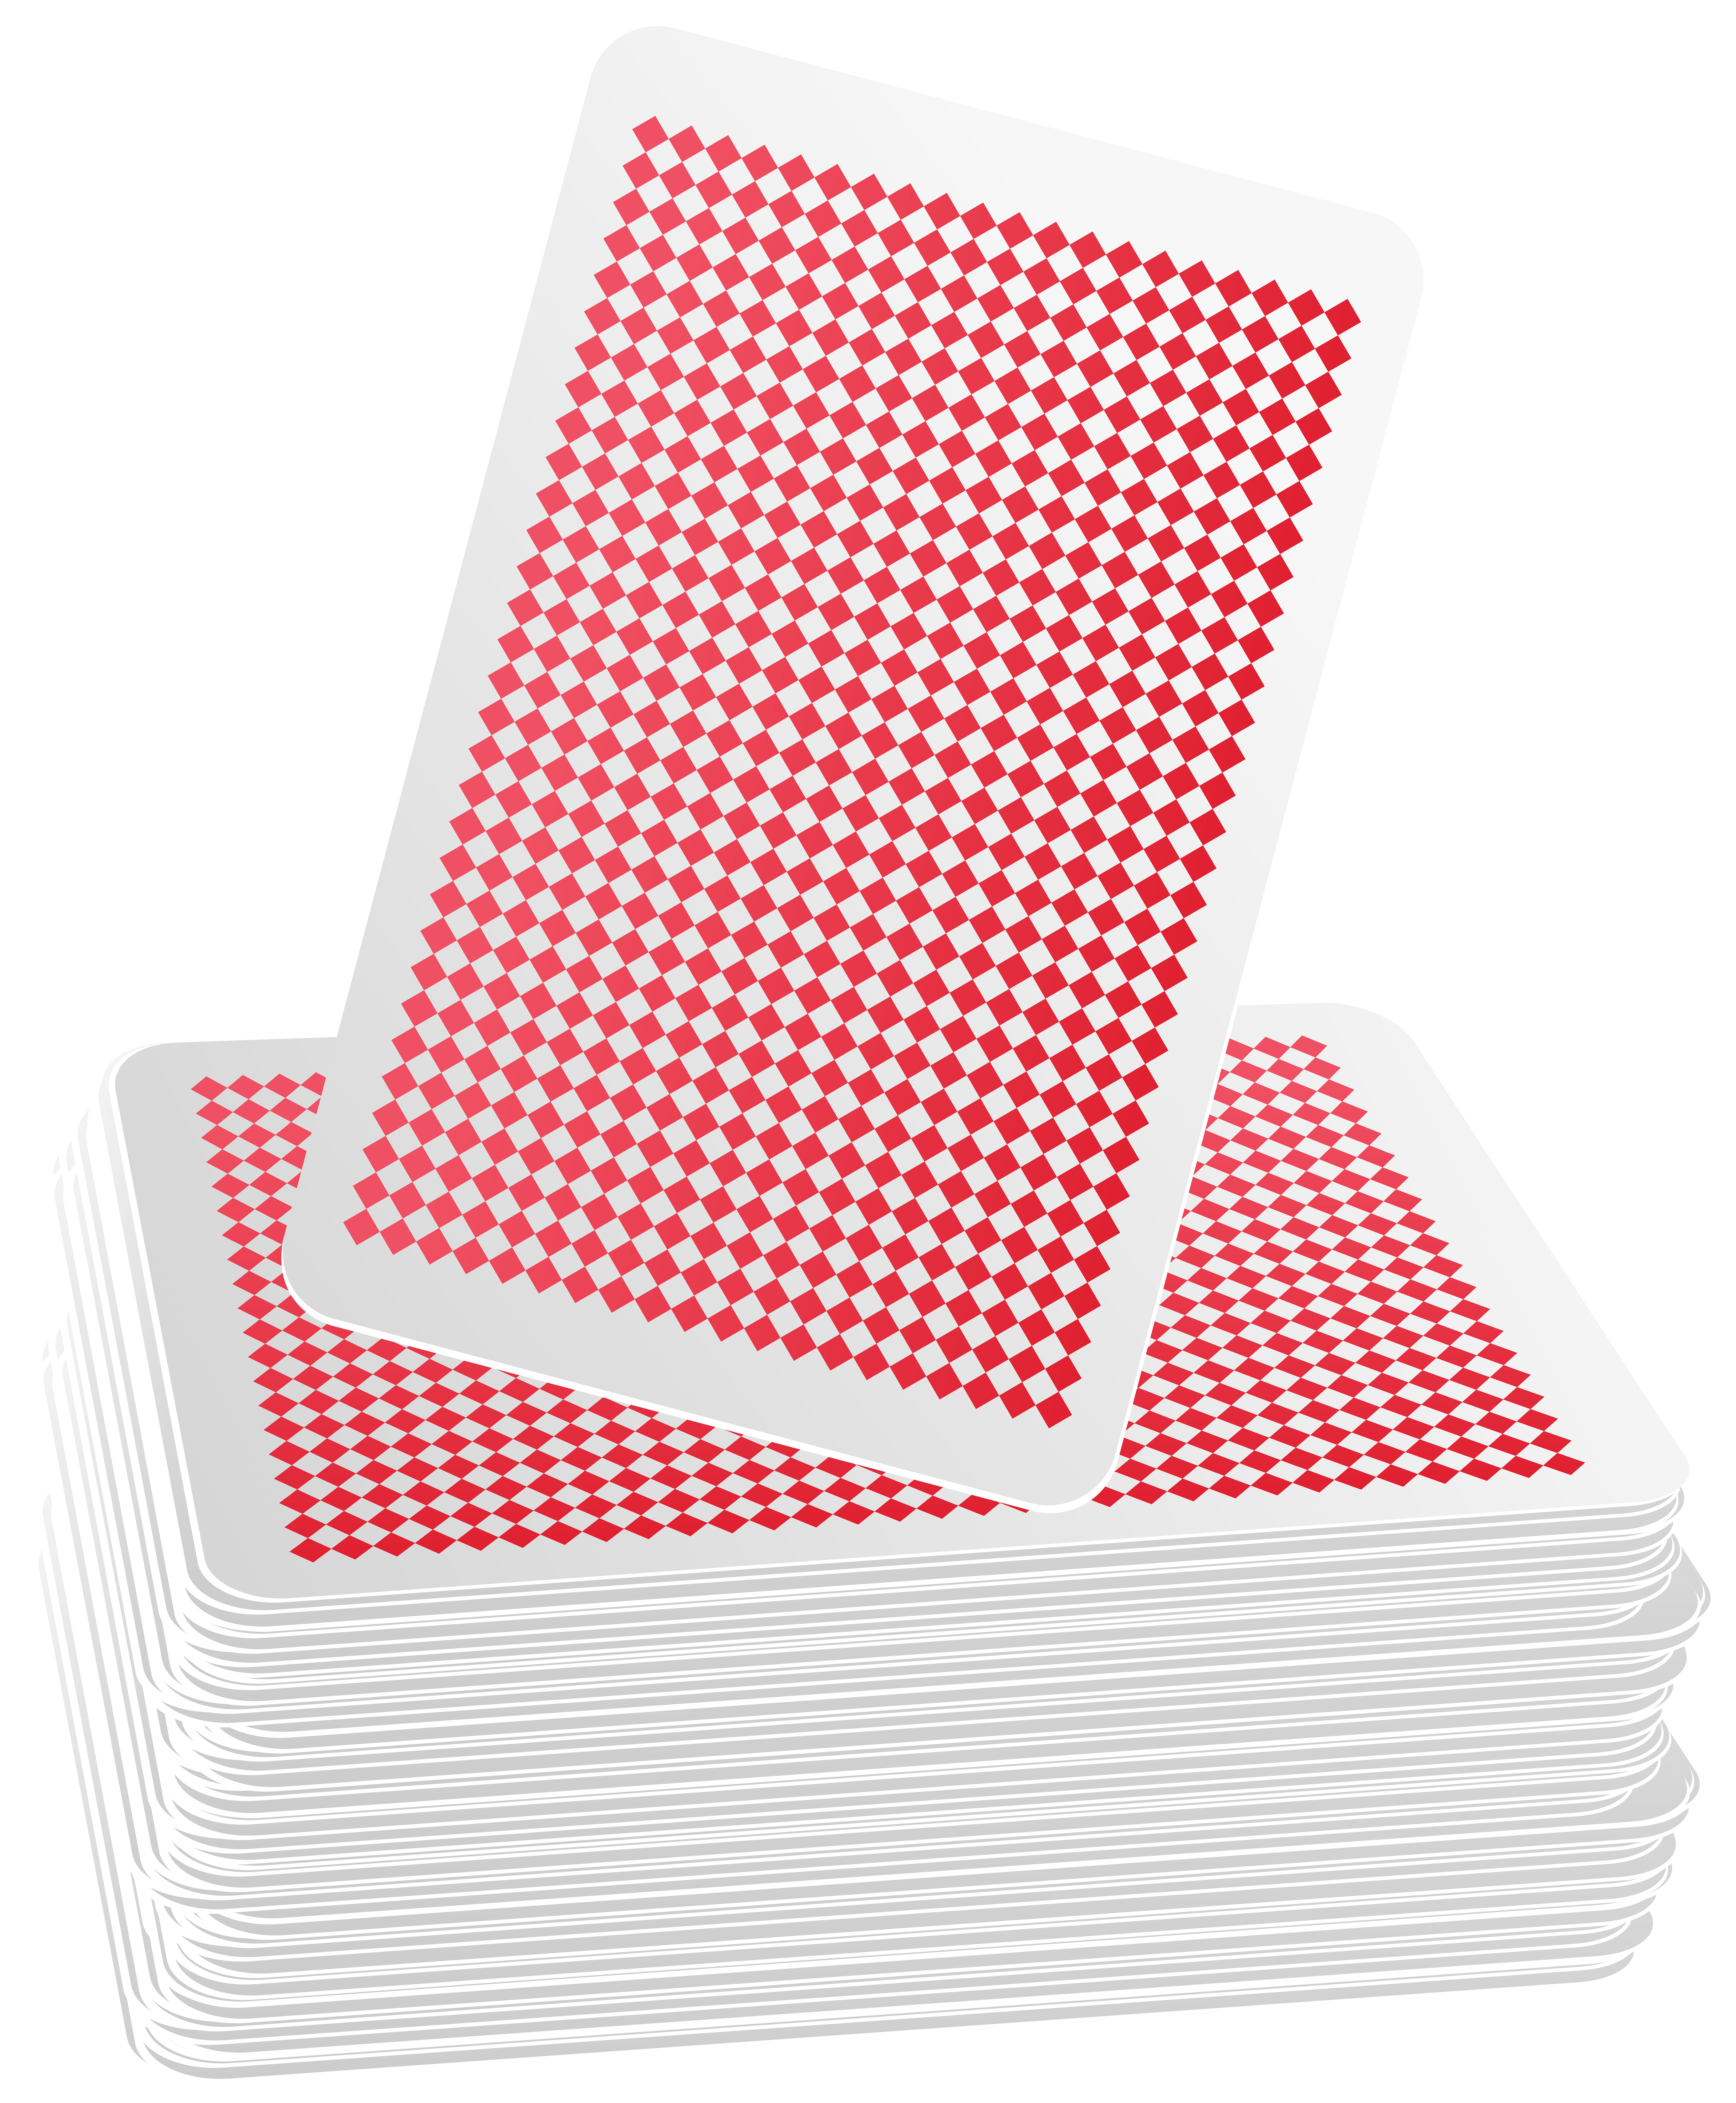 Deck of Cards PNG Clip Art Image.